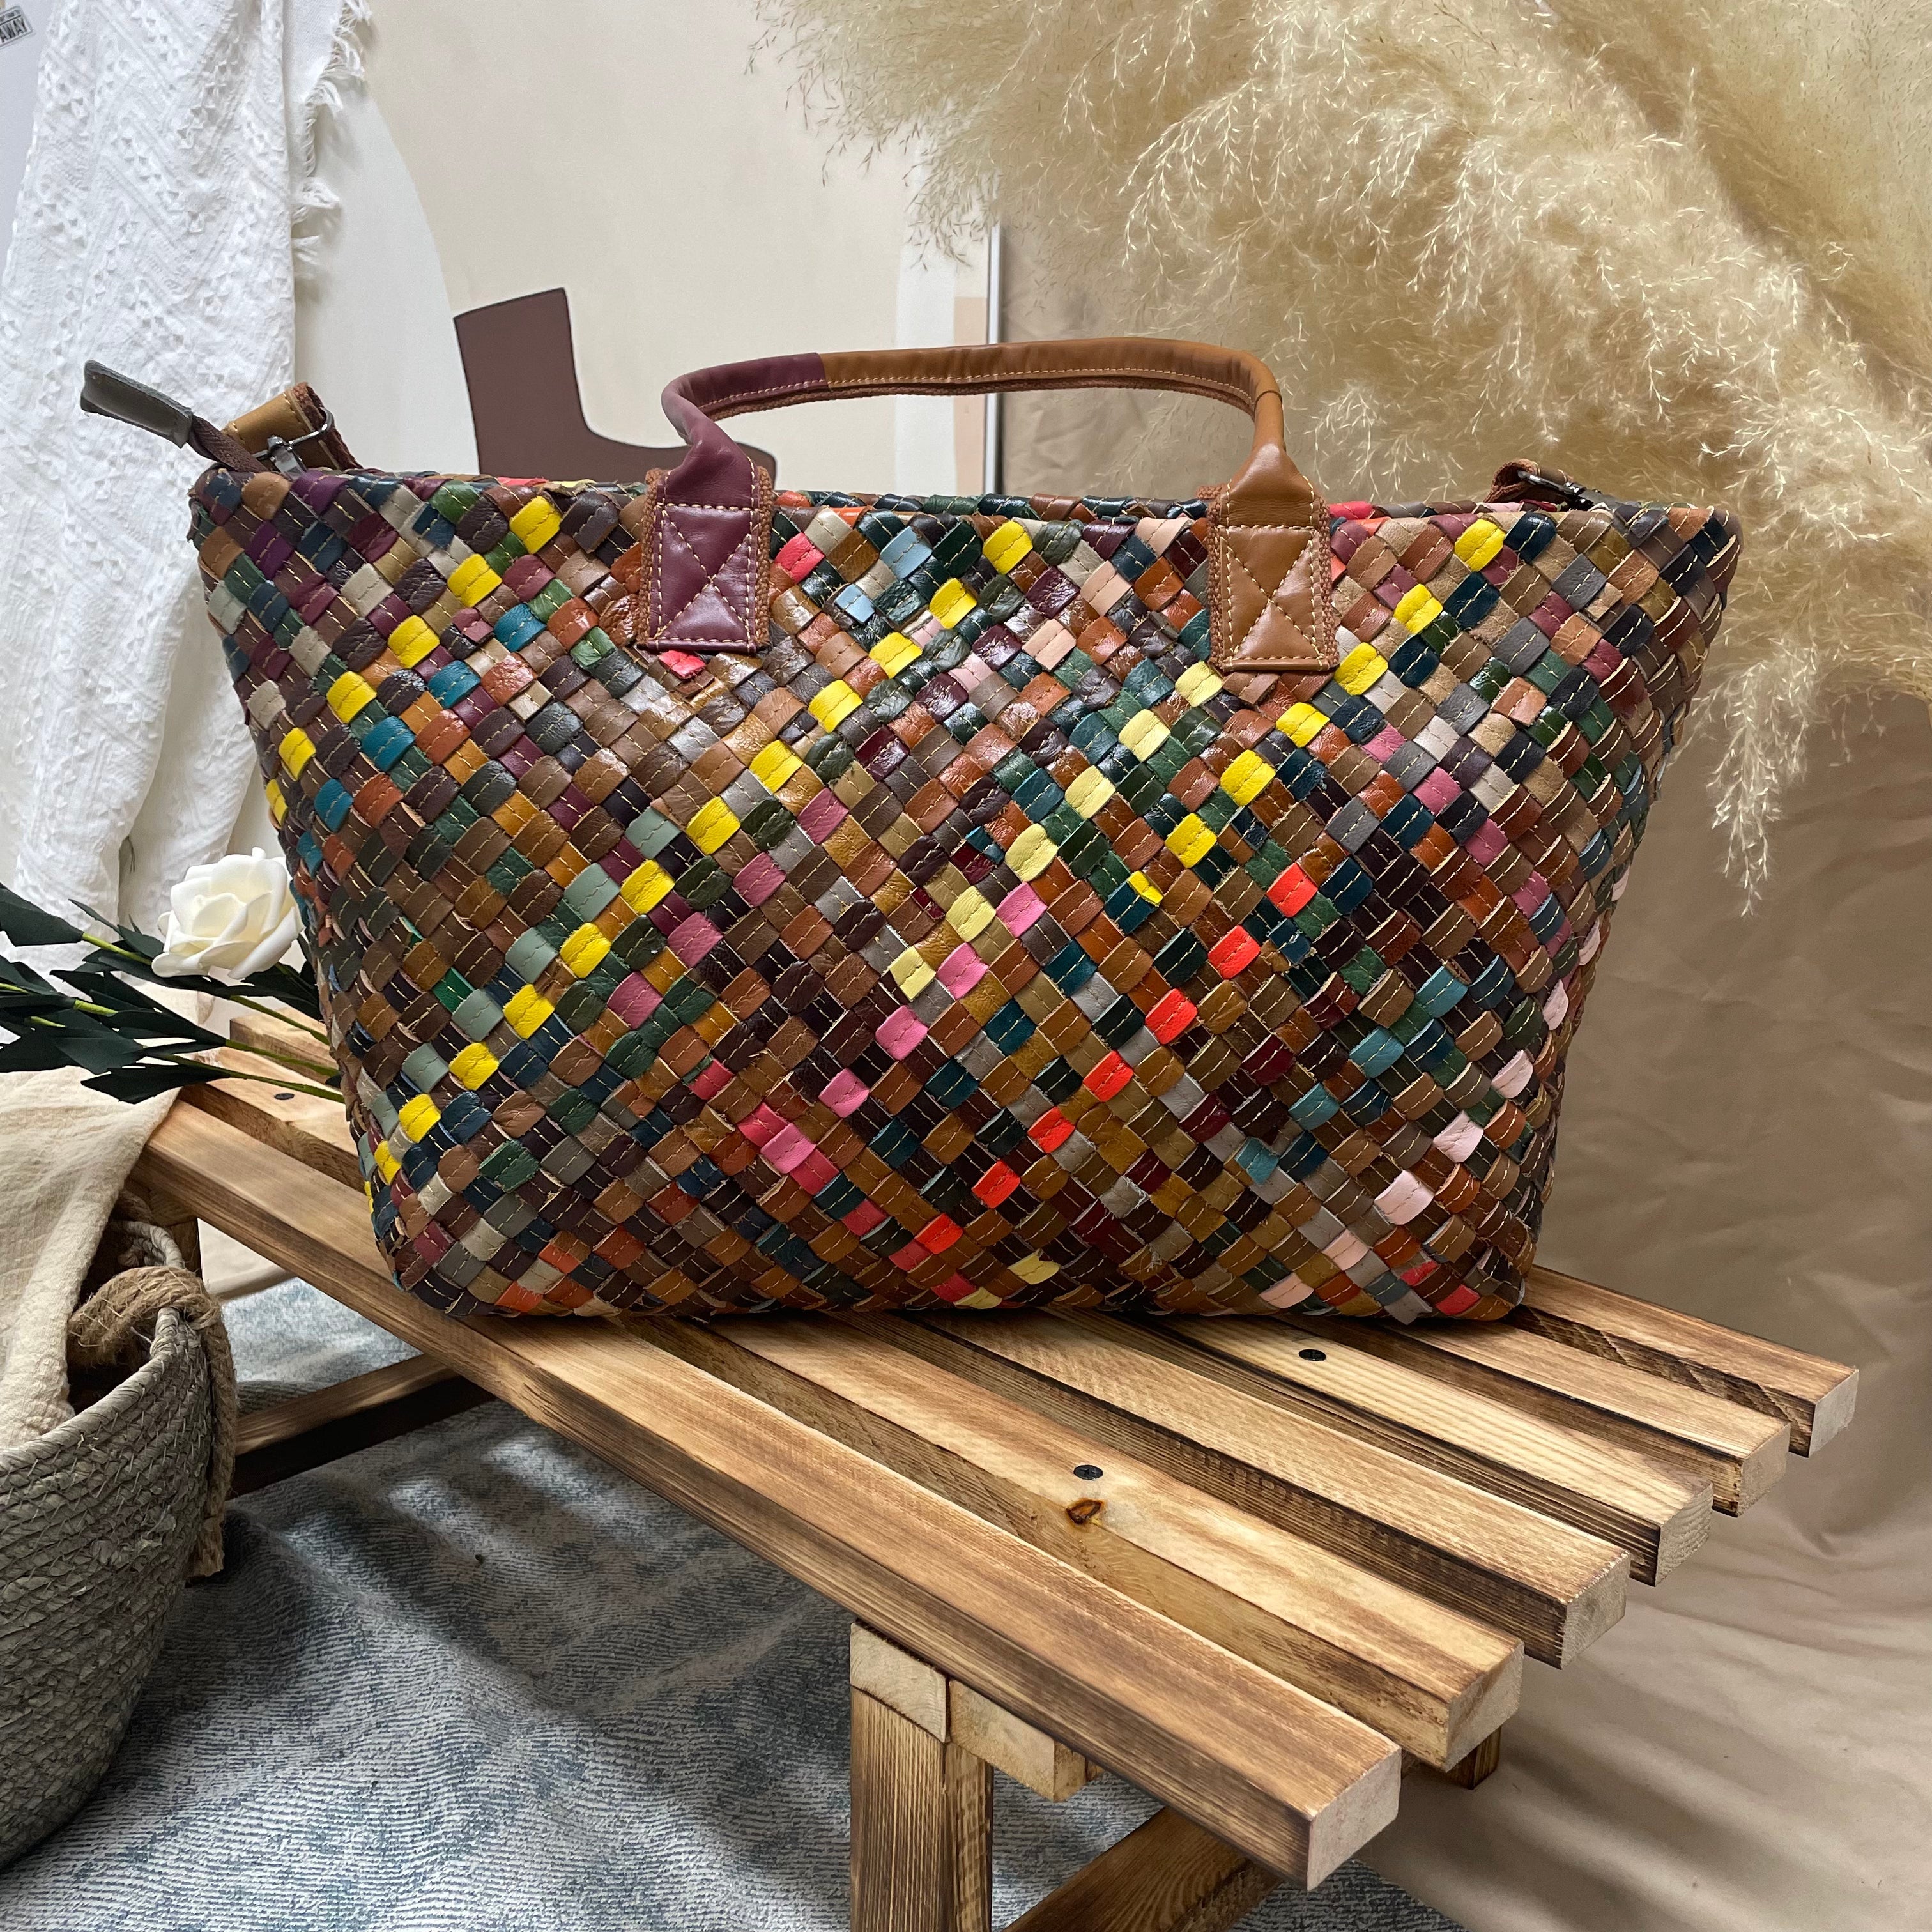 Top Handle Bag, Basket Bag, Gift for Girl/Mother | Large Leather Woven Tote Bag for Women